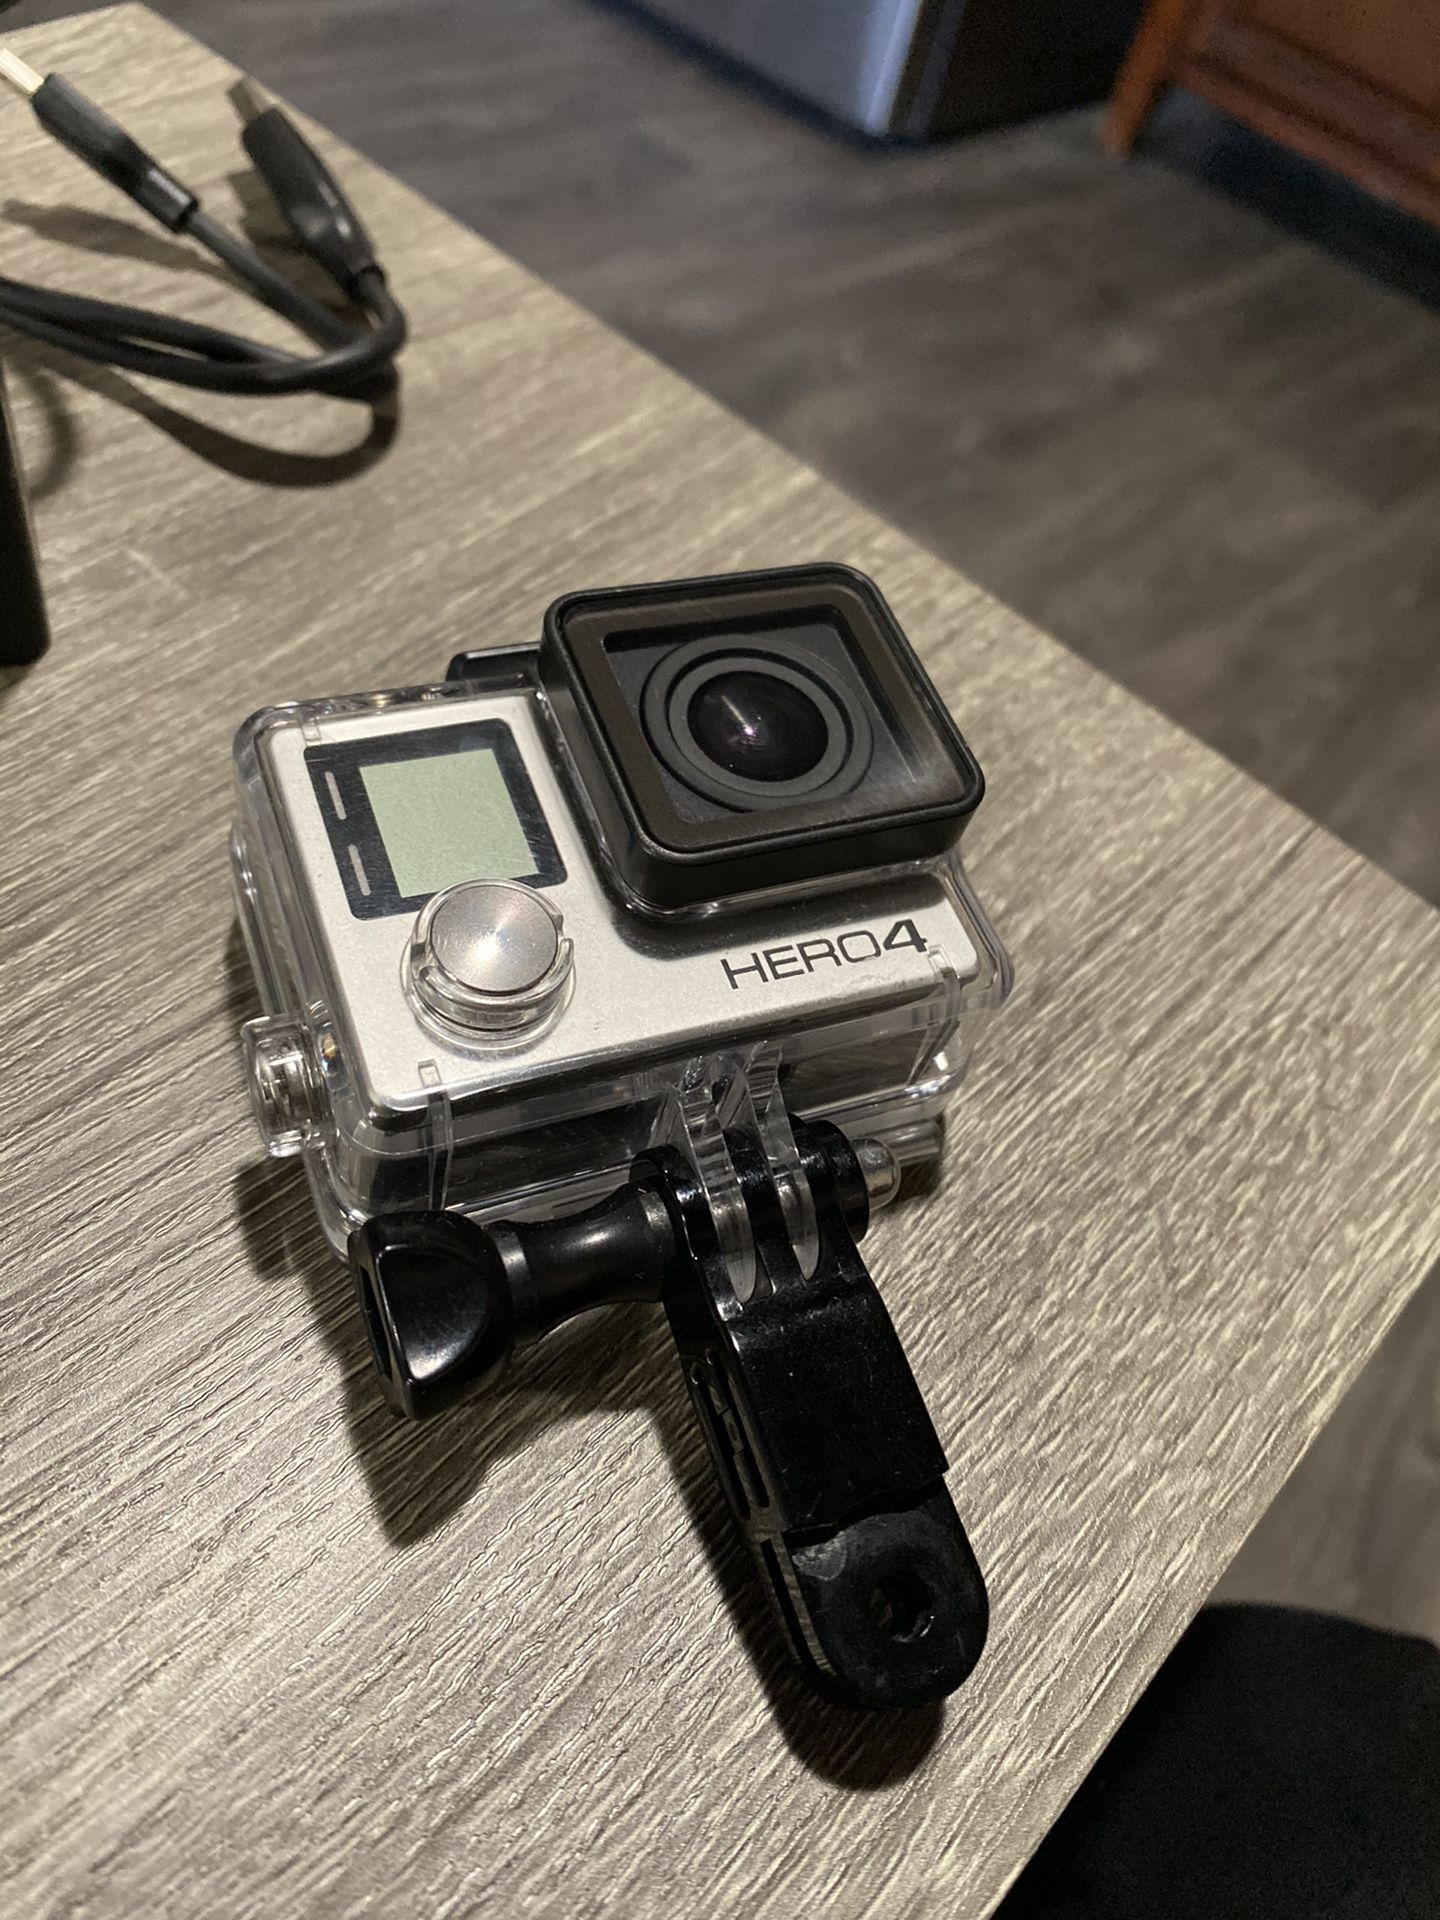 GO PRO hero 4, GO PRO dual battery charger, extra battery’s